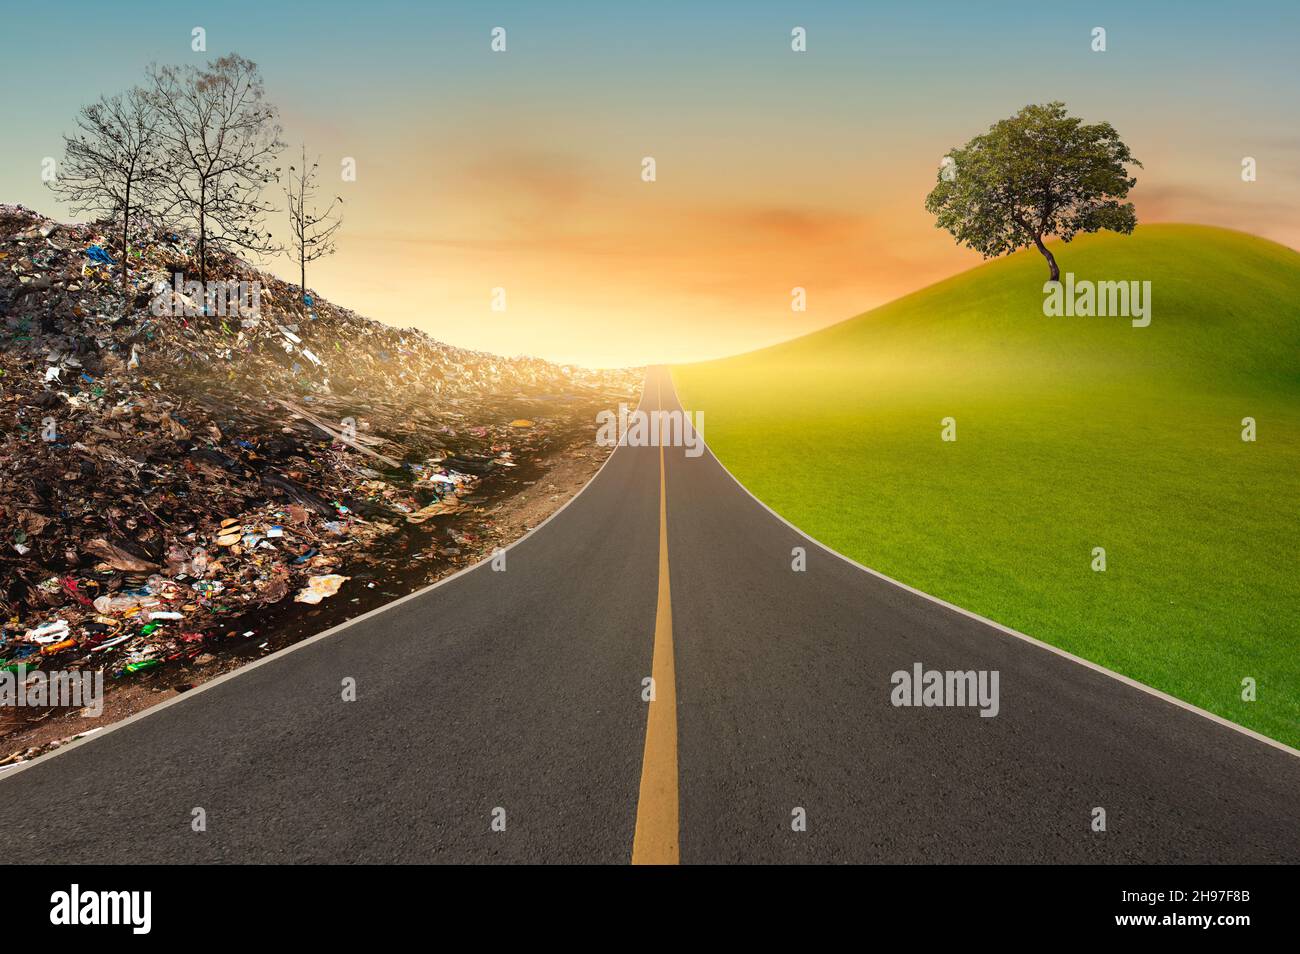 One side of the road shows the green tree on green mountains, and the other side shows dead trees on mountains of trash. Stock Photo